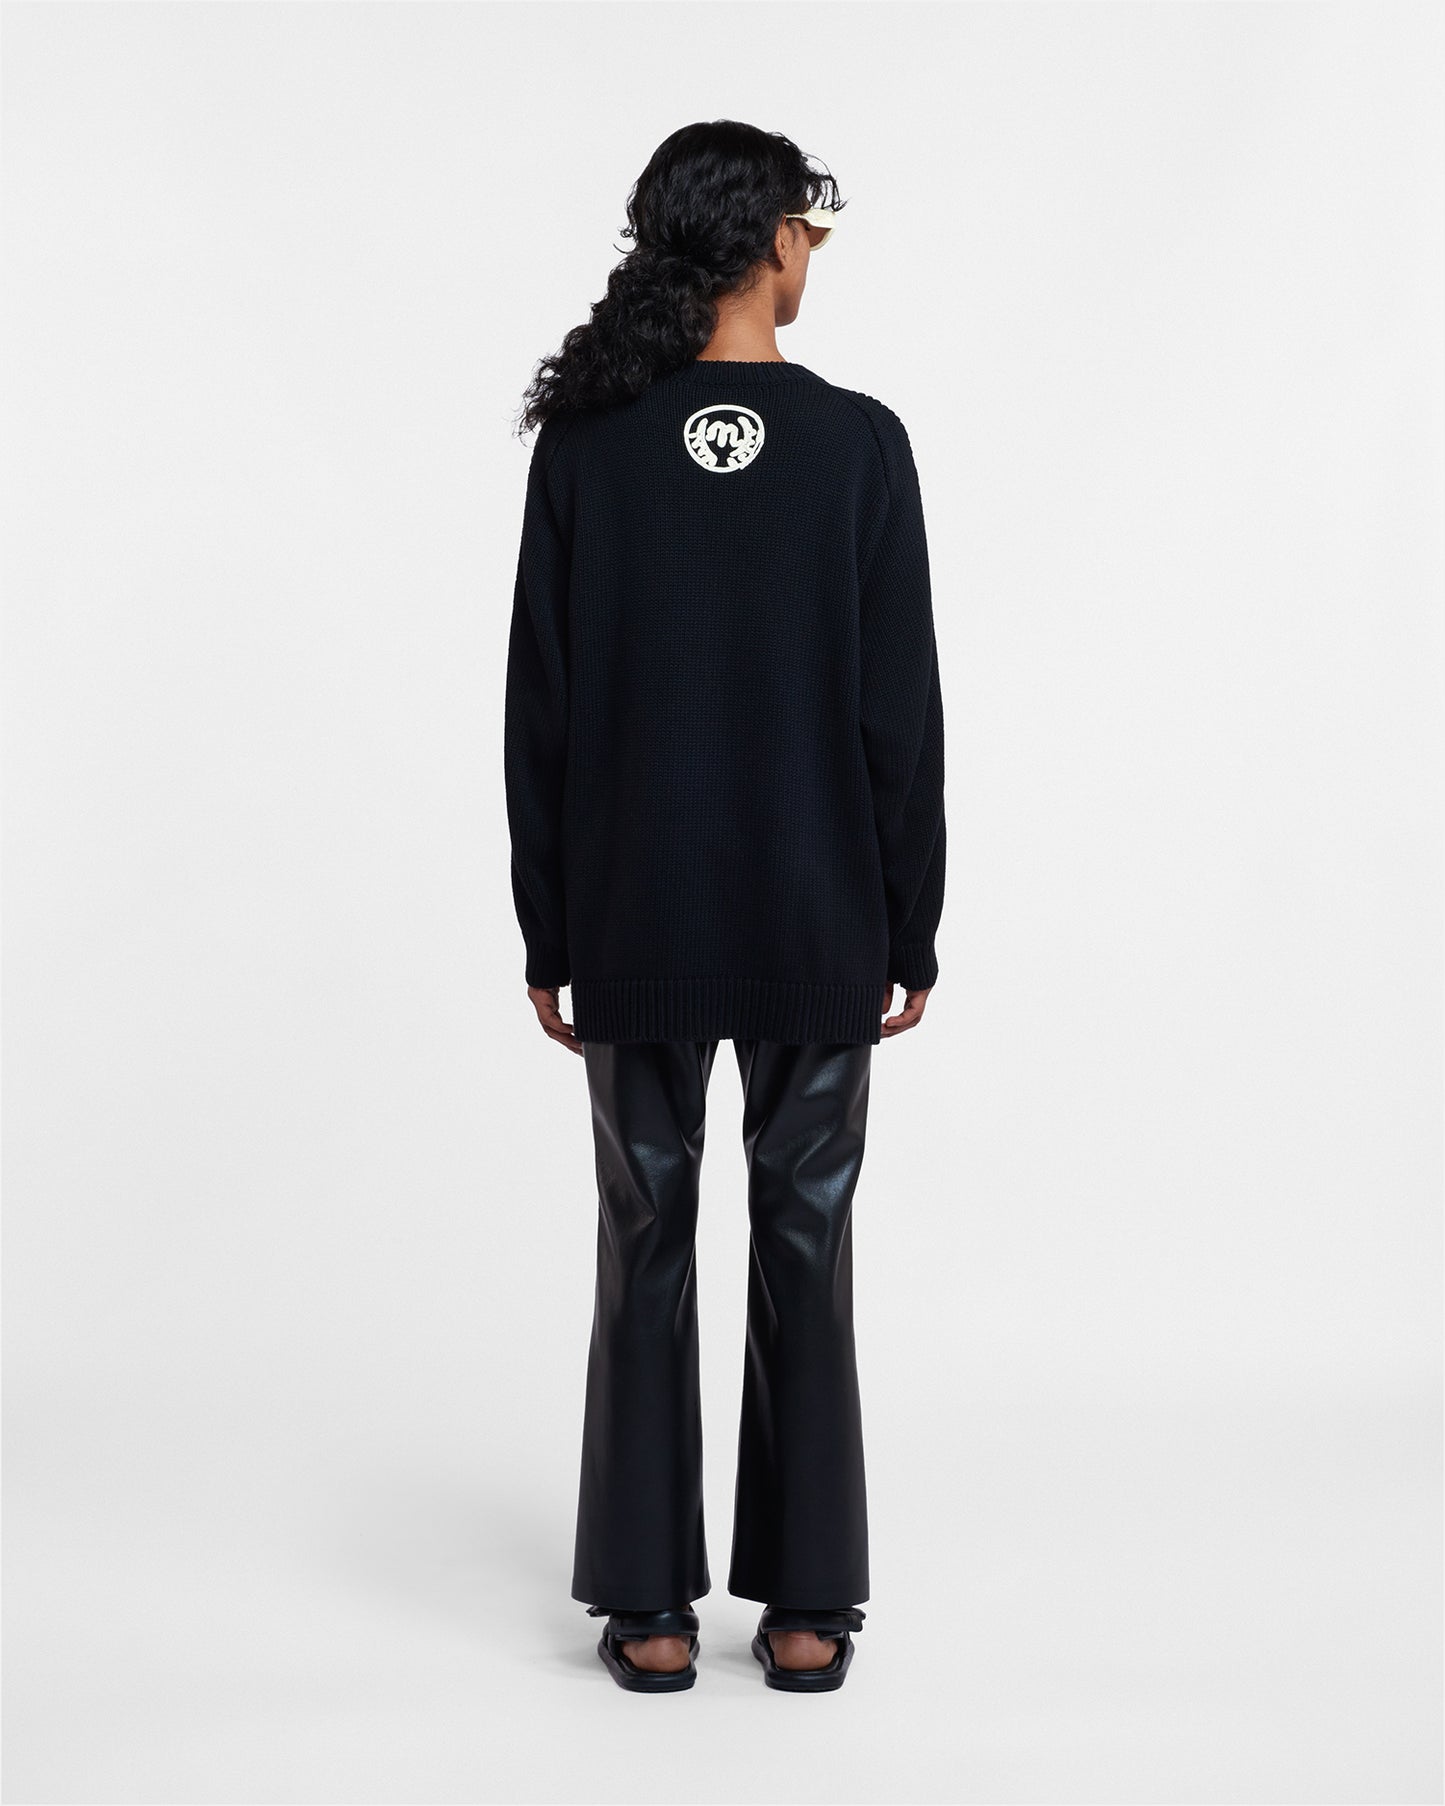 Busra - Embroidered Cotton Sweater - Black